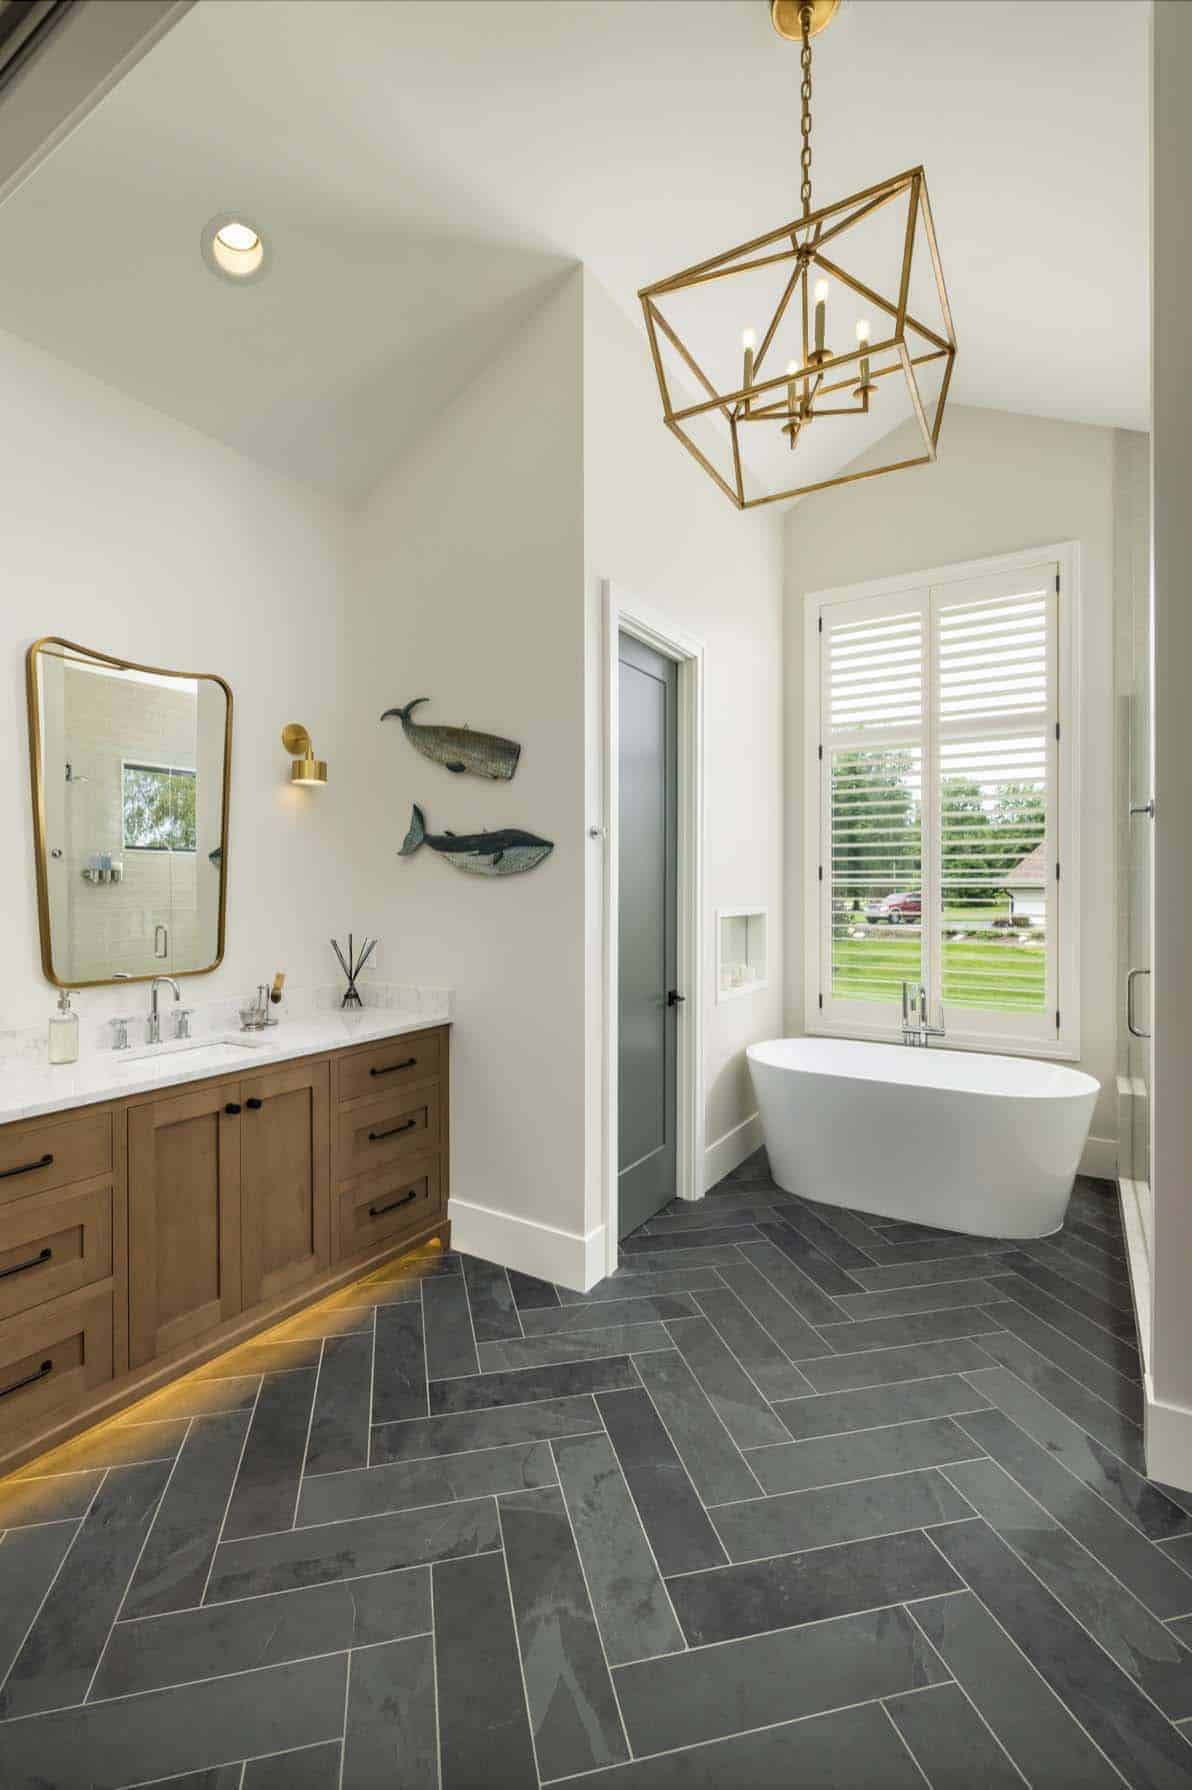 modern farmhouse style bathroom with a vanity and freestanding tub